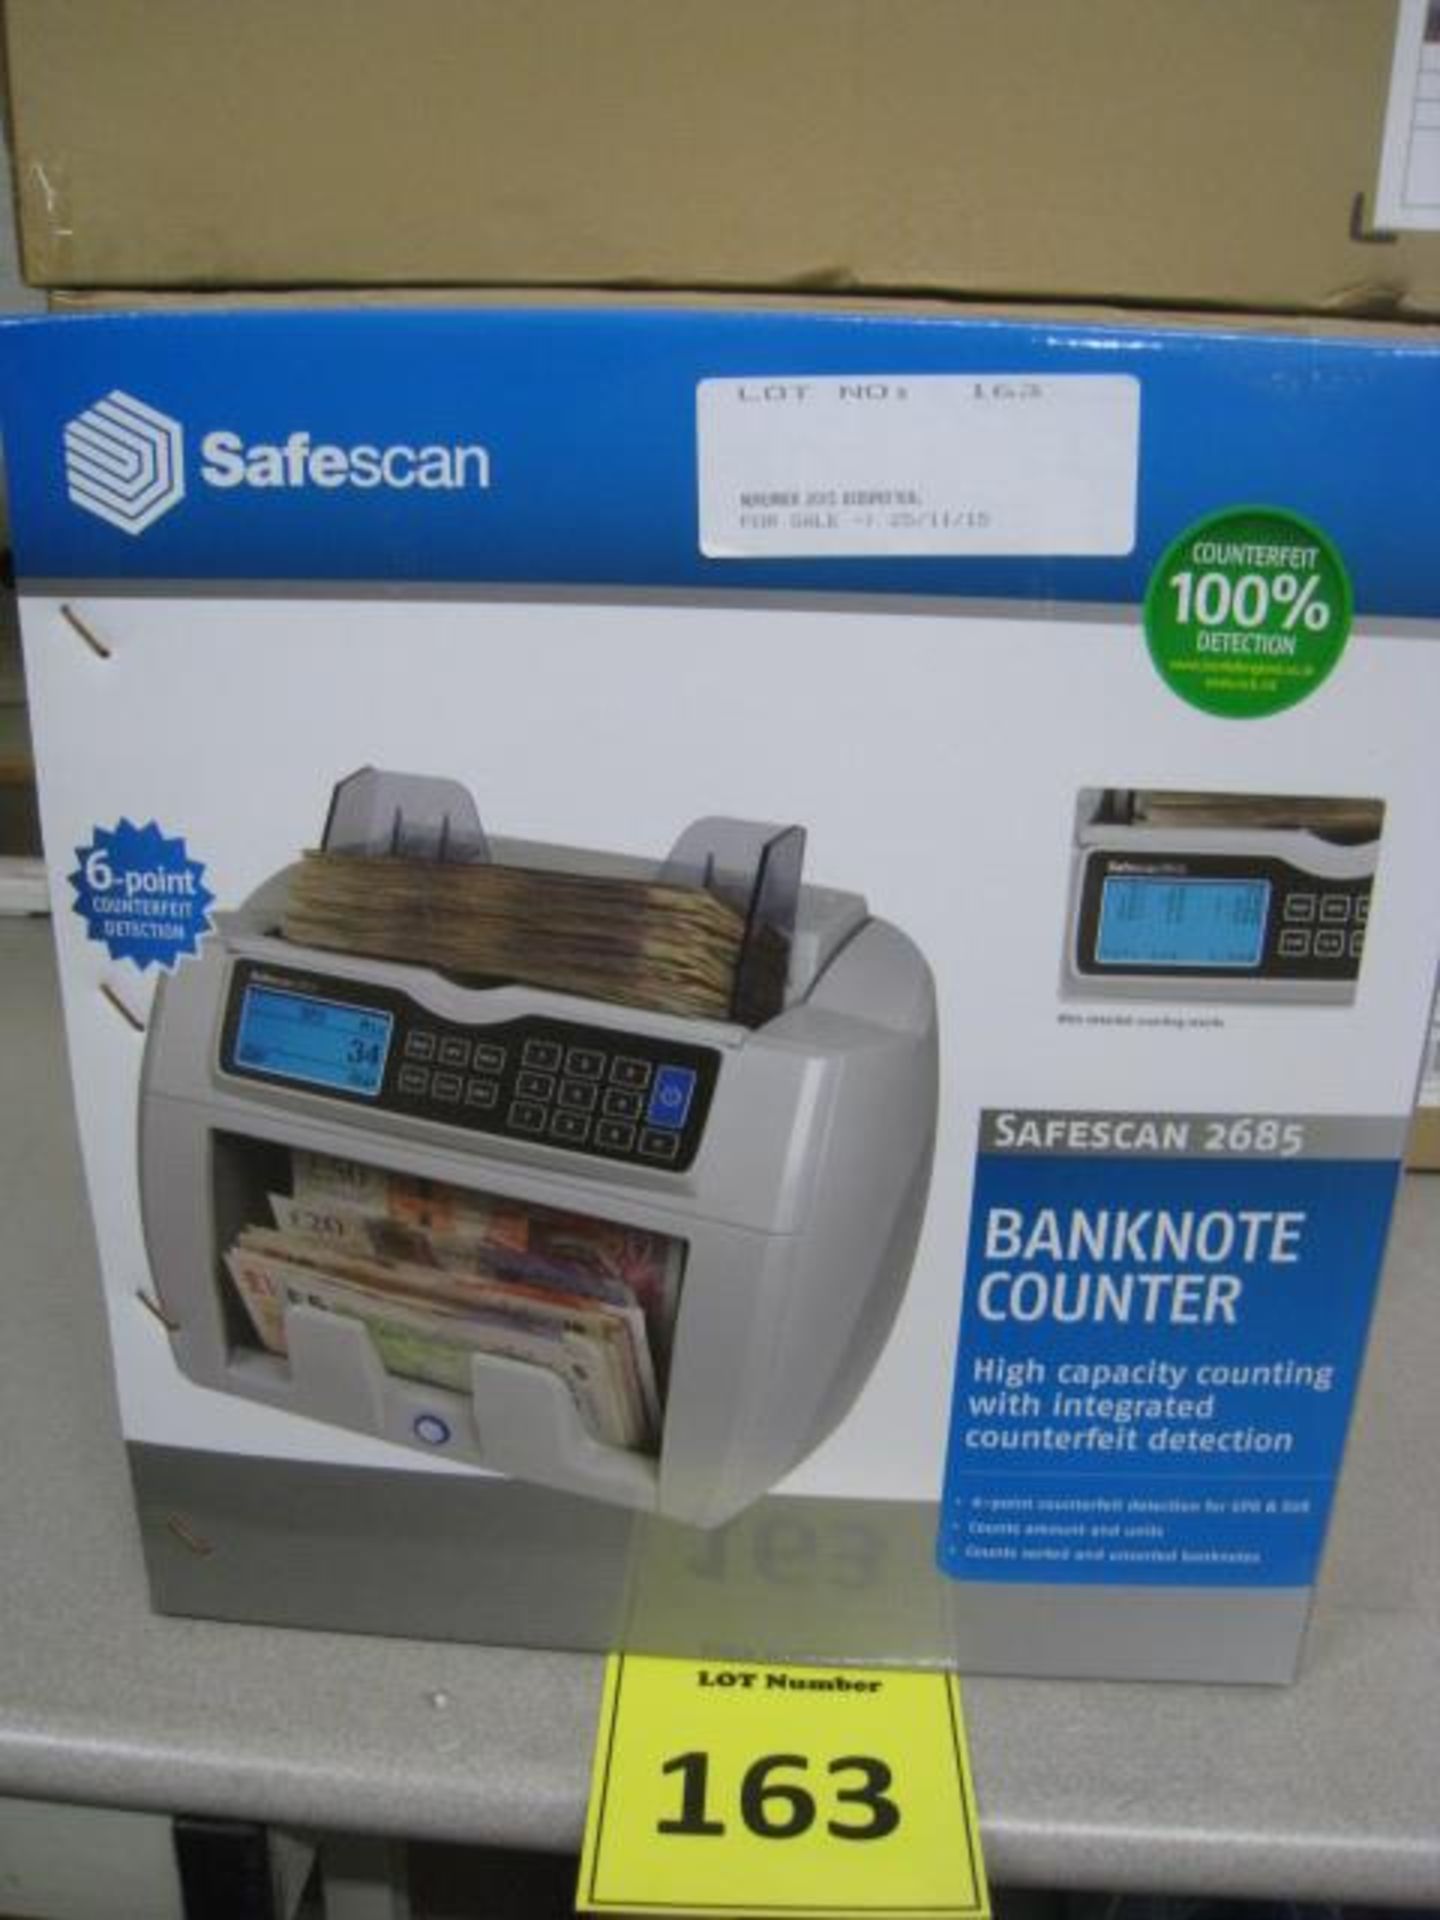 SAFESCAN 2685 BANKNOTE COUNTER. HIGH CAPACITY WITH INTEGRATED 6 POINT COUNTERFIET DETECTION FOR